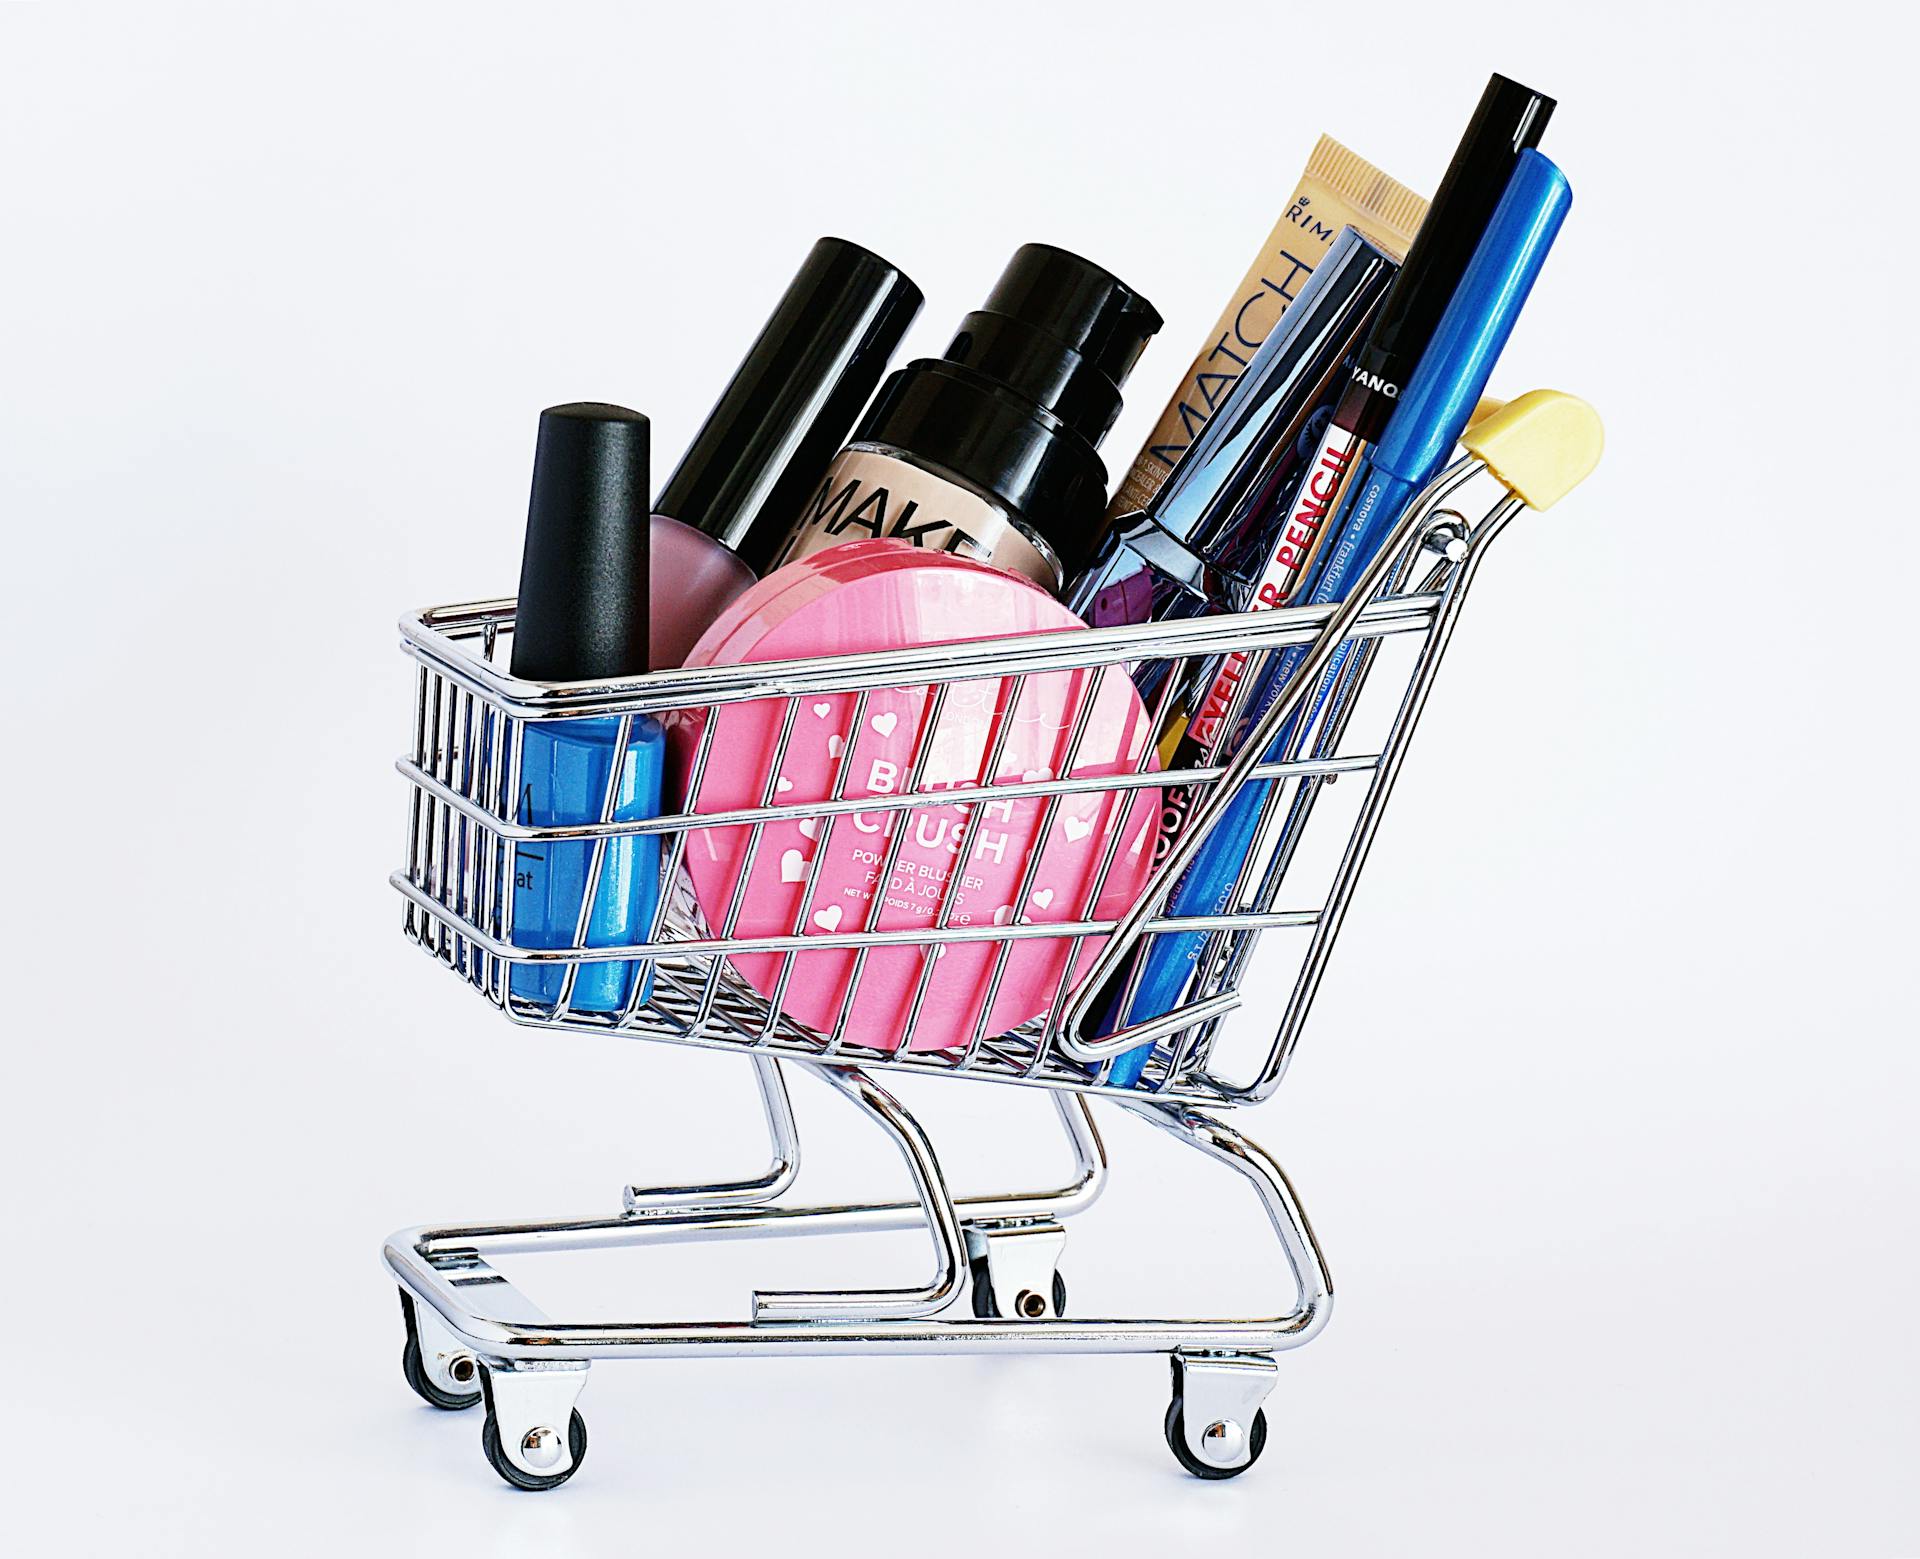 Makeup products in a mini shopping cart | Source: Pexels